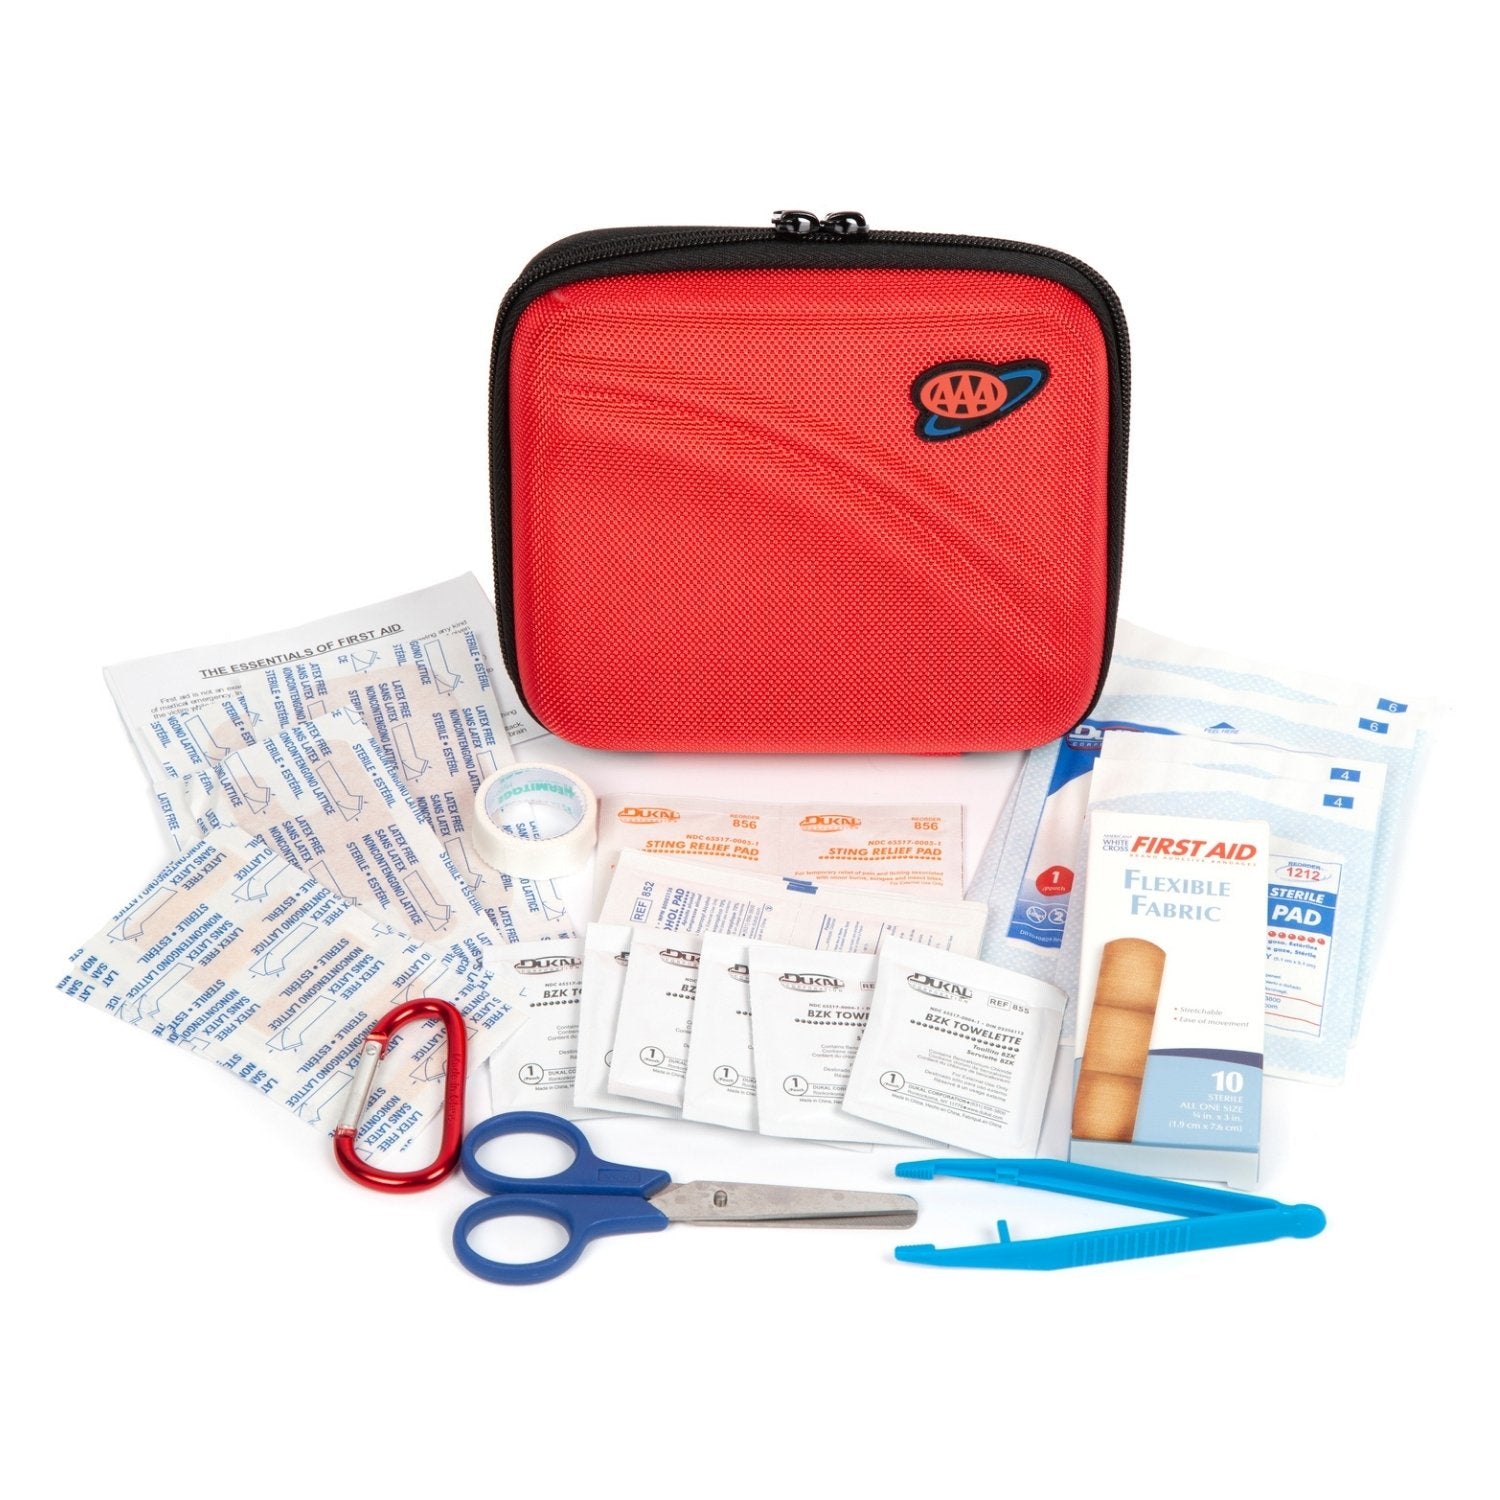 The MEDIC first aid kit - standard version with essential and trauma medical supplies